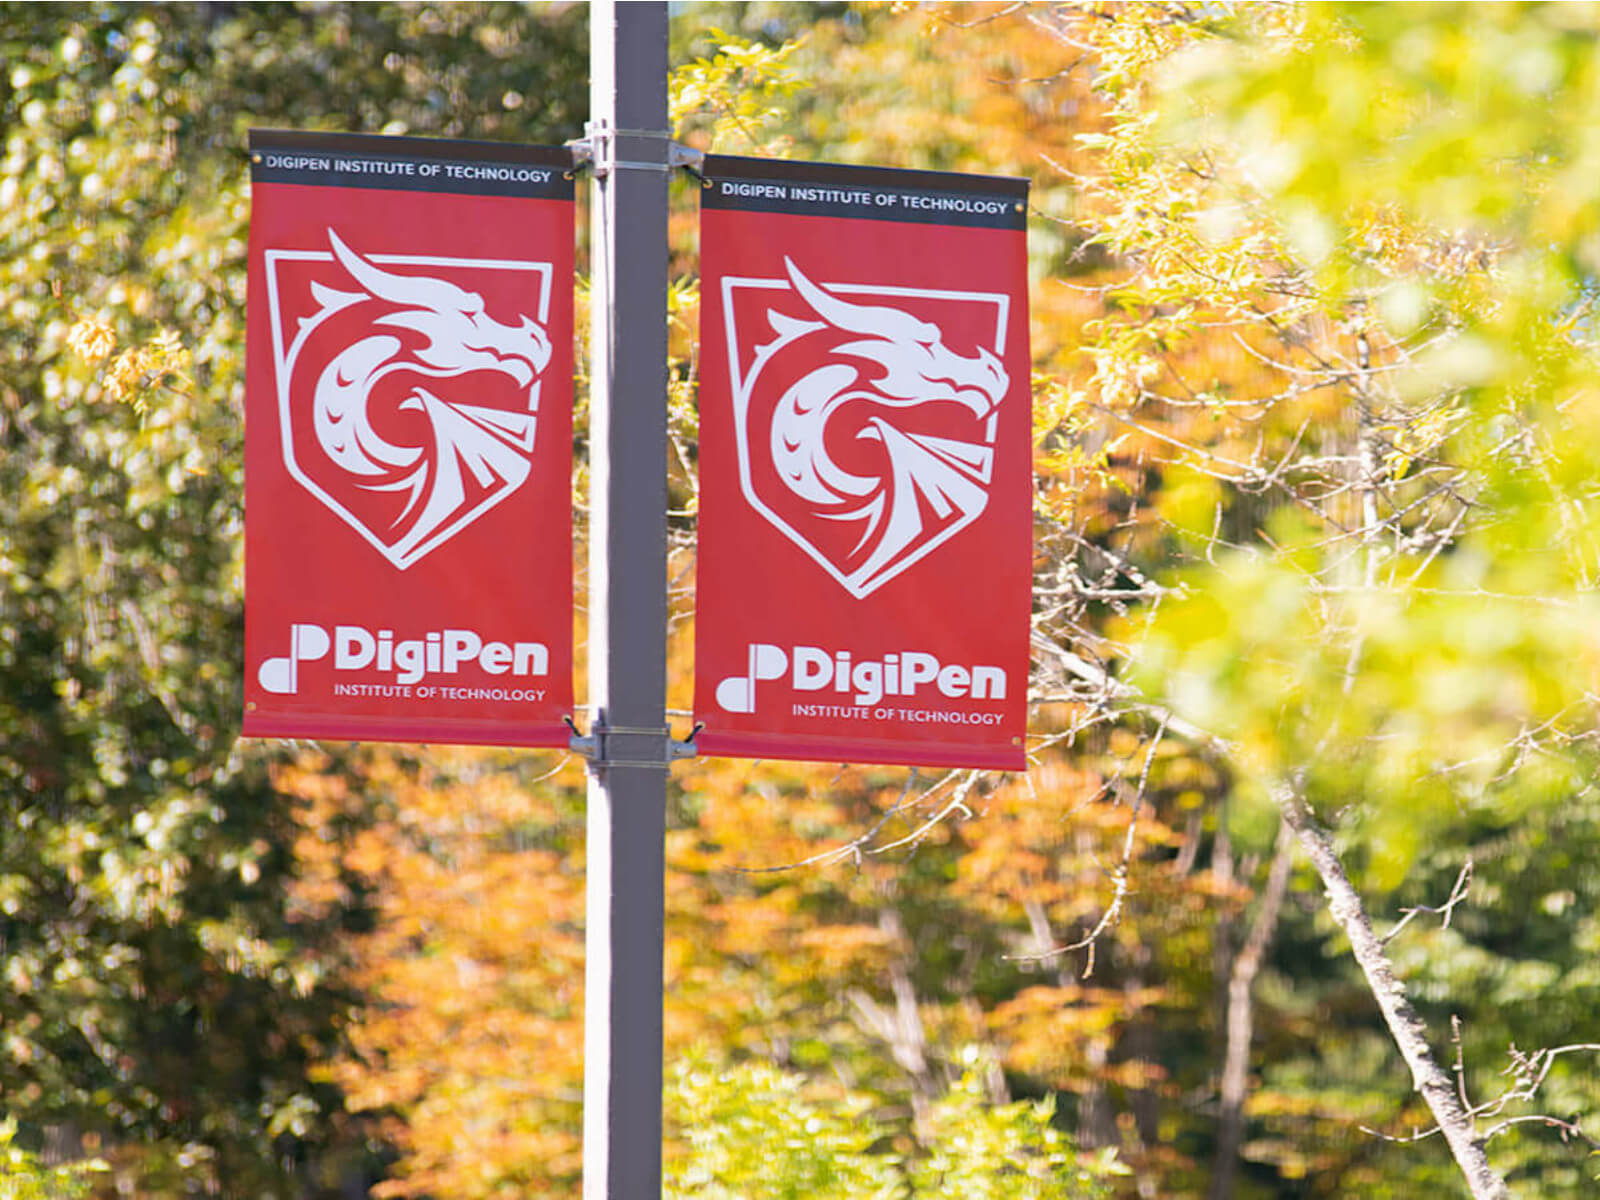 Two DigiPen banners on pole set against fall scenery